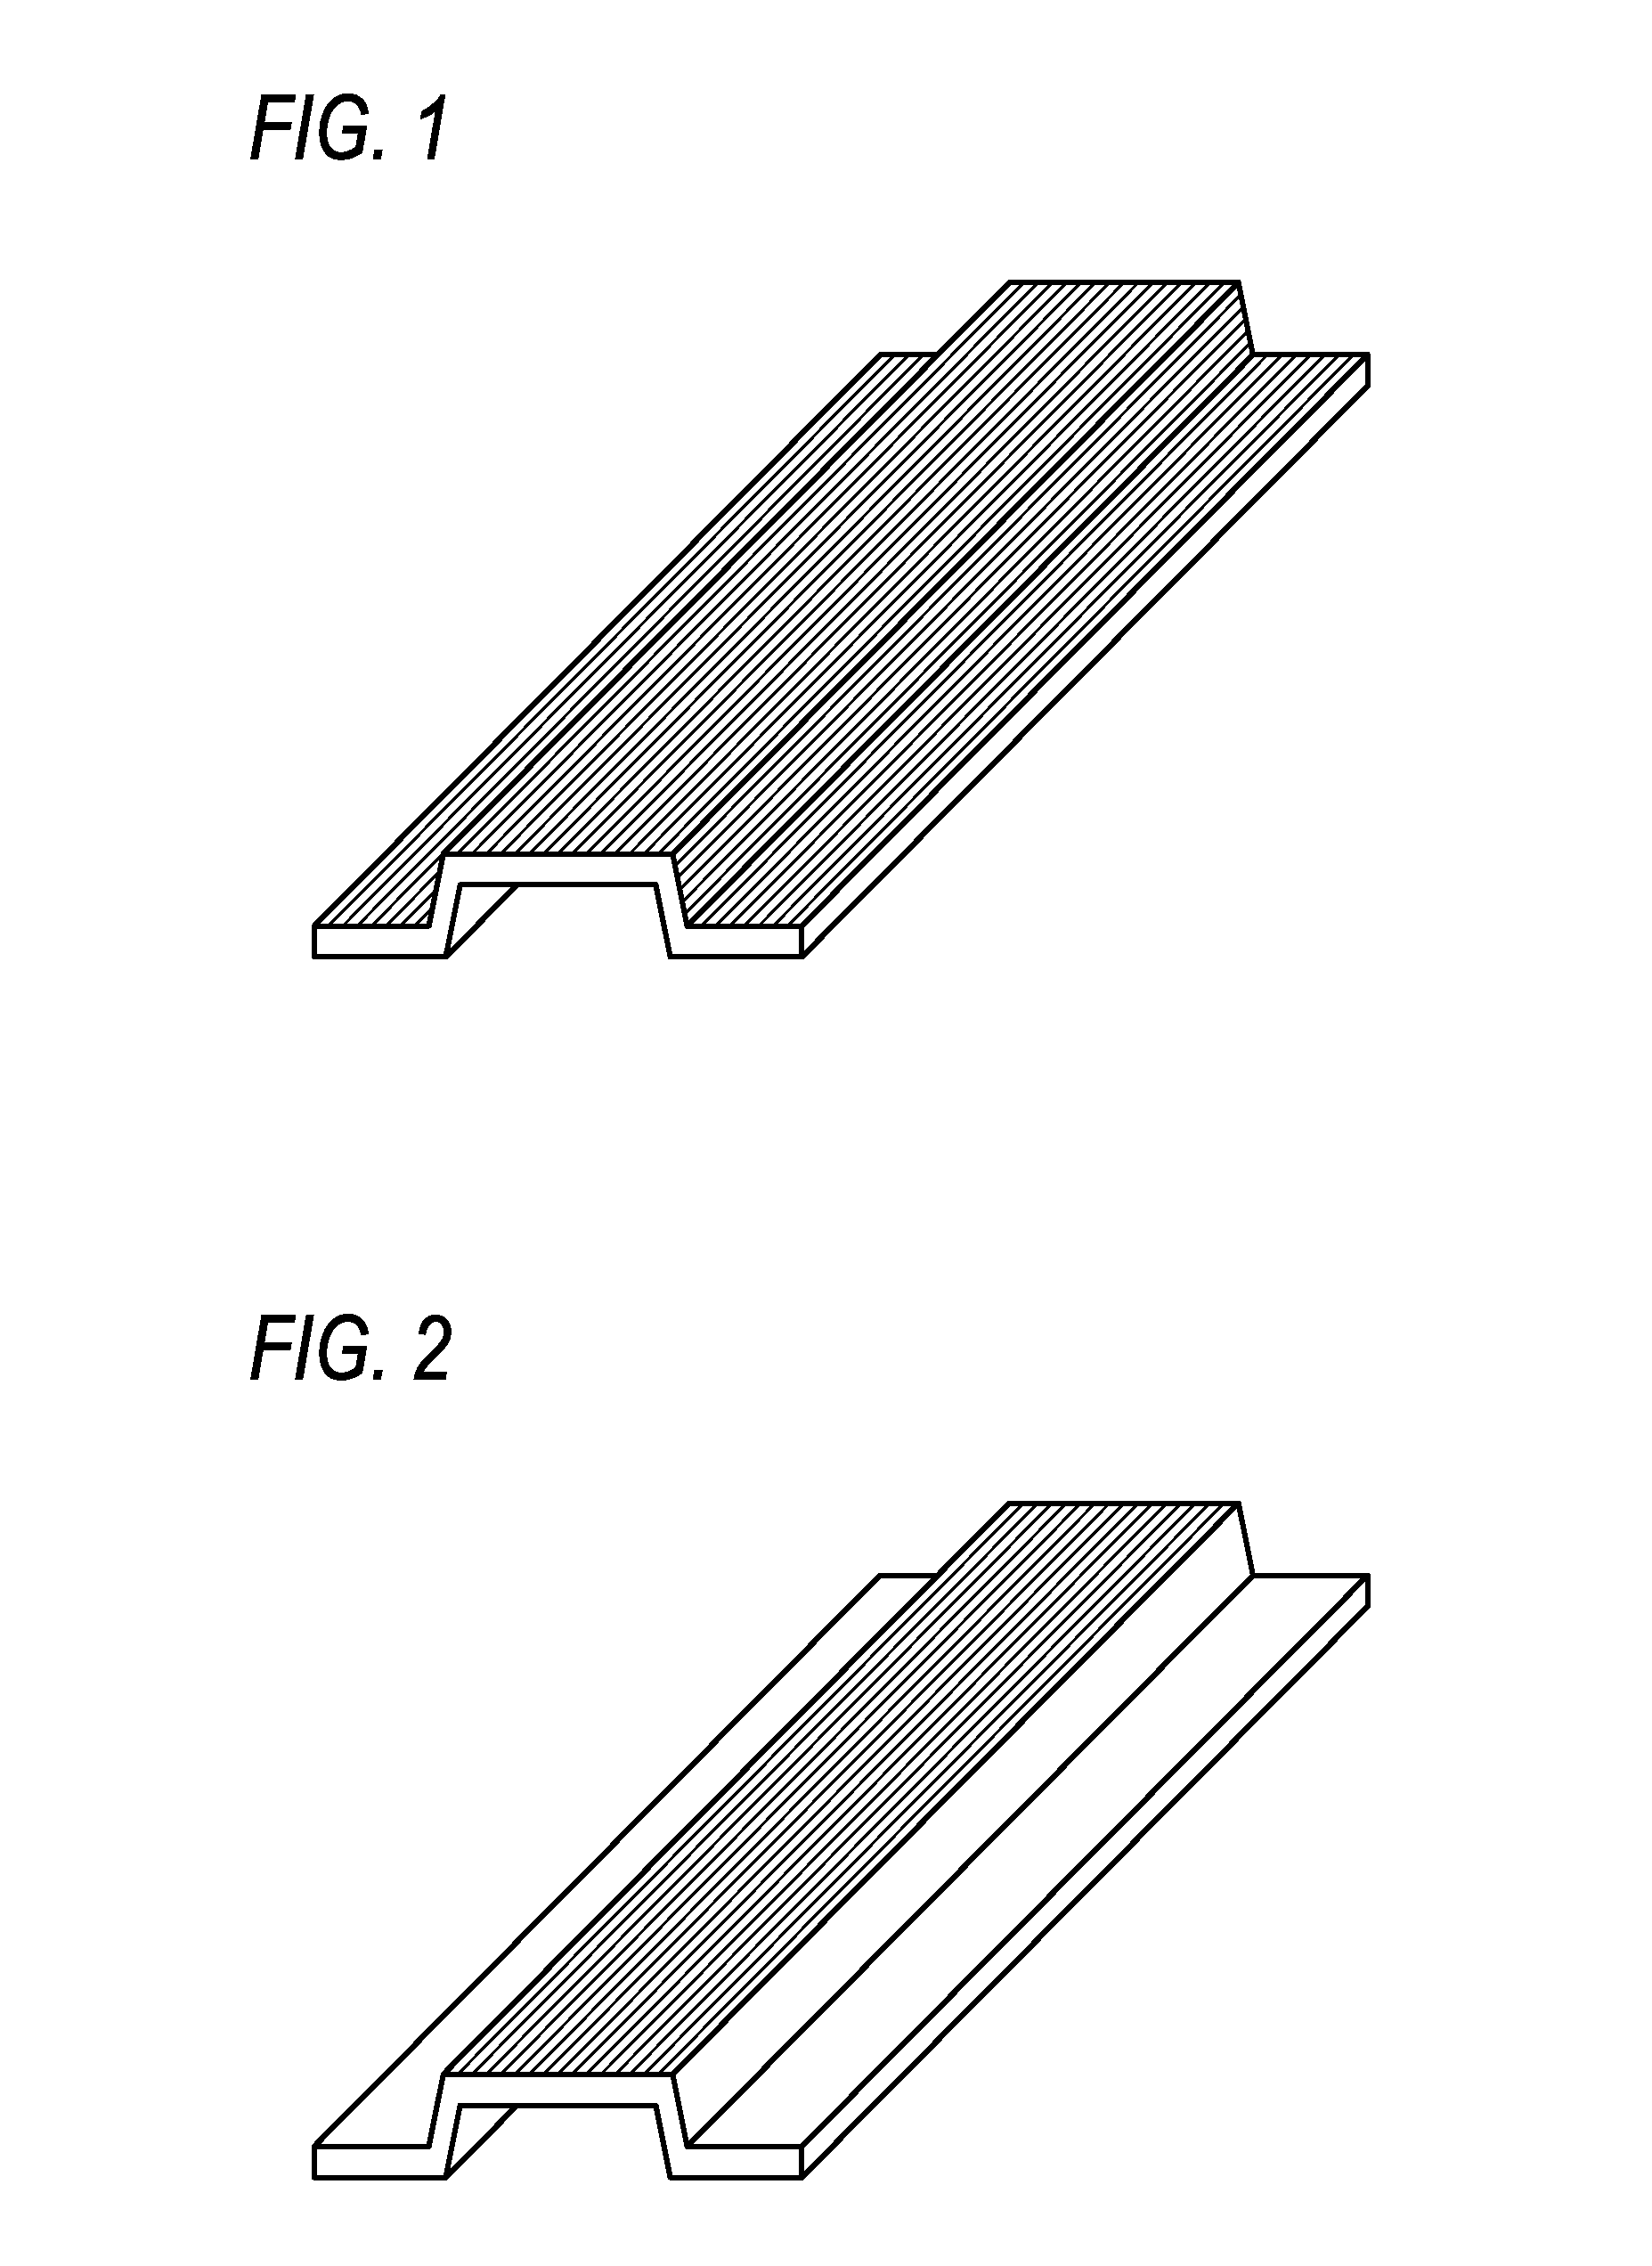 Carbon Fiber Bundle, Method for Producing The Same, and Molded Article Made Thereof